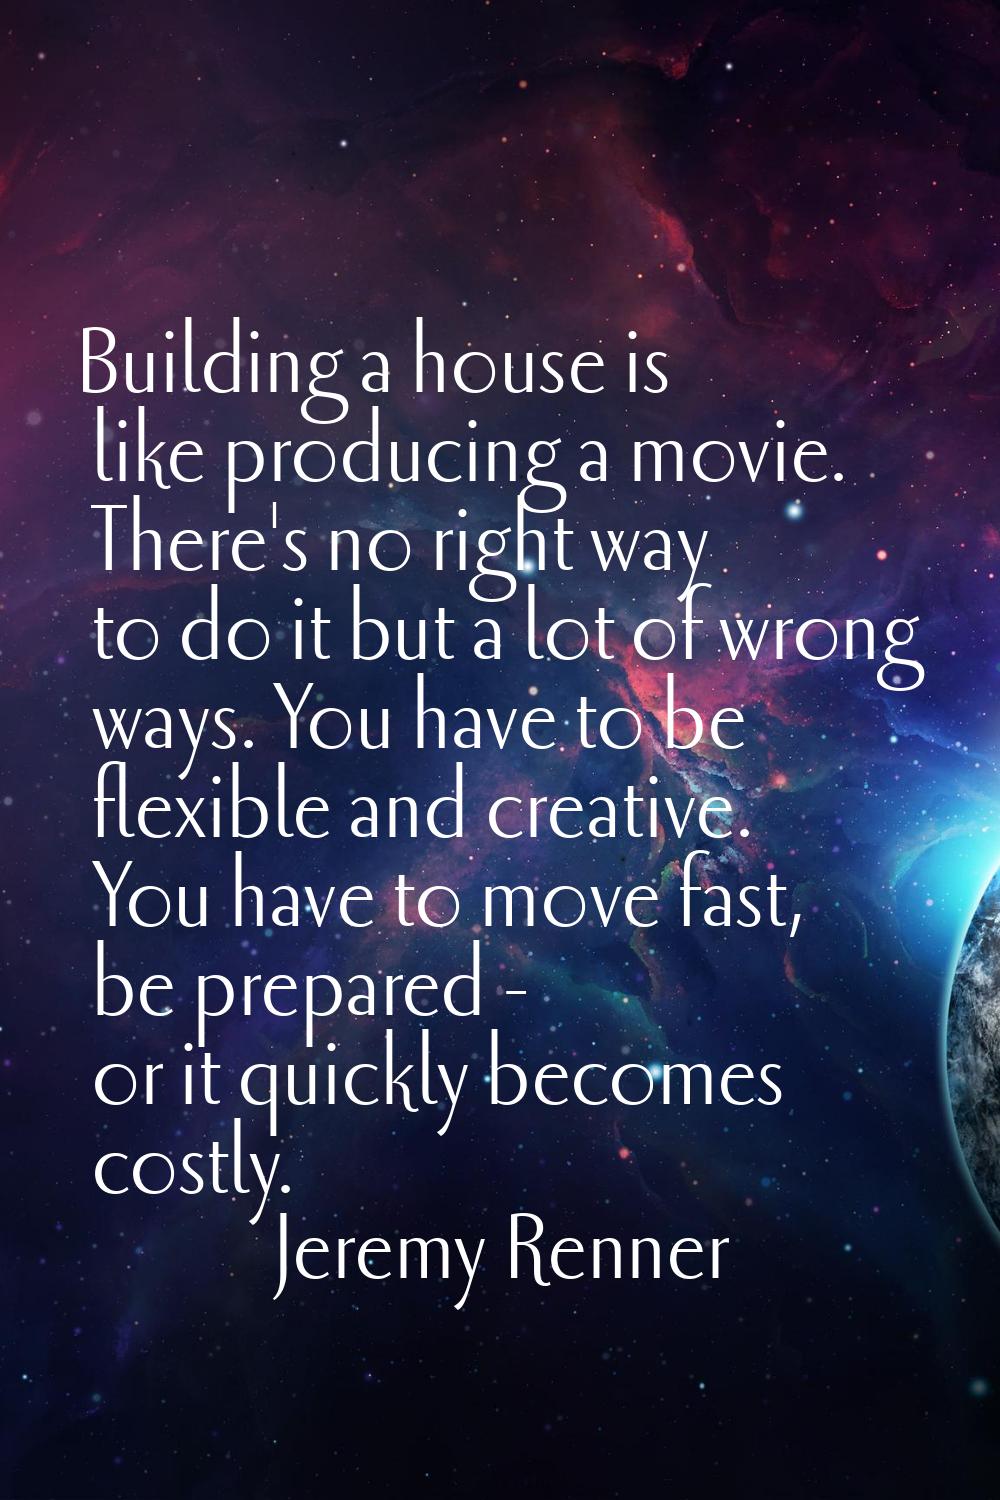 Building a house is like producing a movie. There's no right way to do it but a lot of wrong ways. 